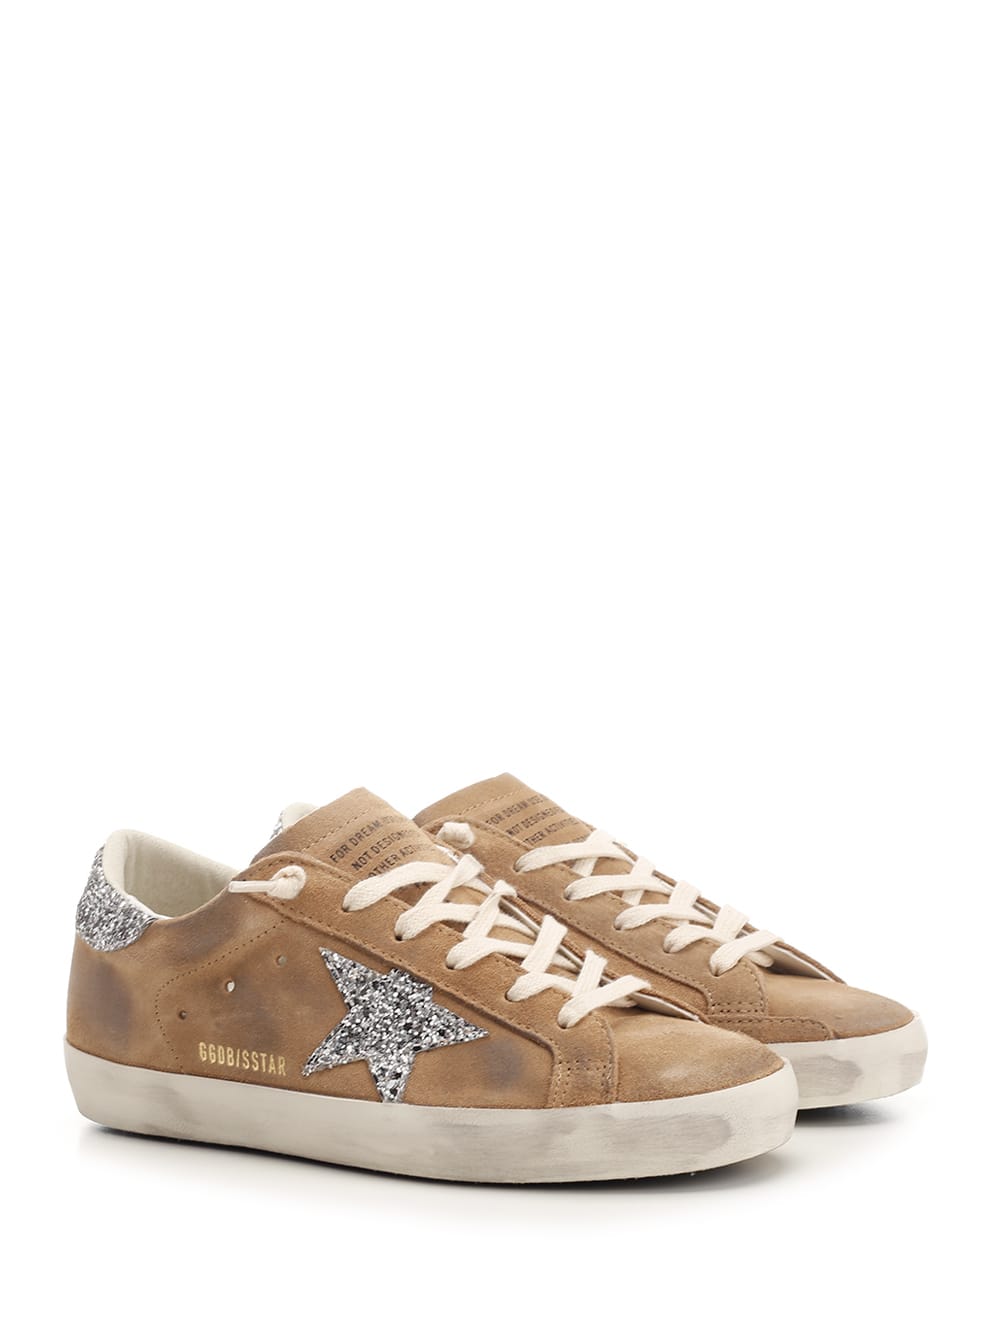 Shop Golden Goose Super-star Classic Sneakers In Tabacco Silver